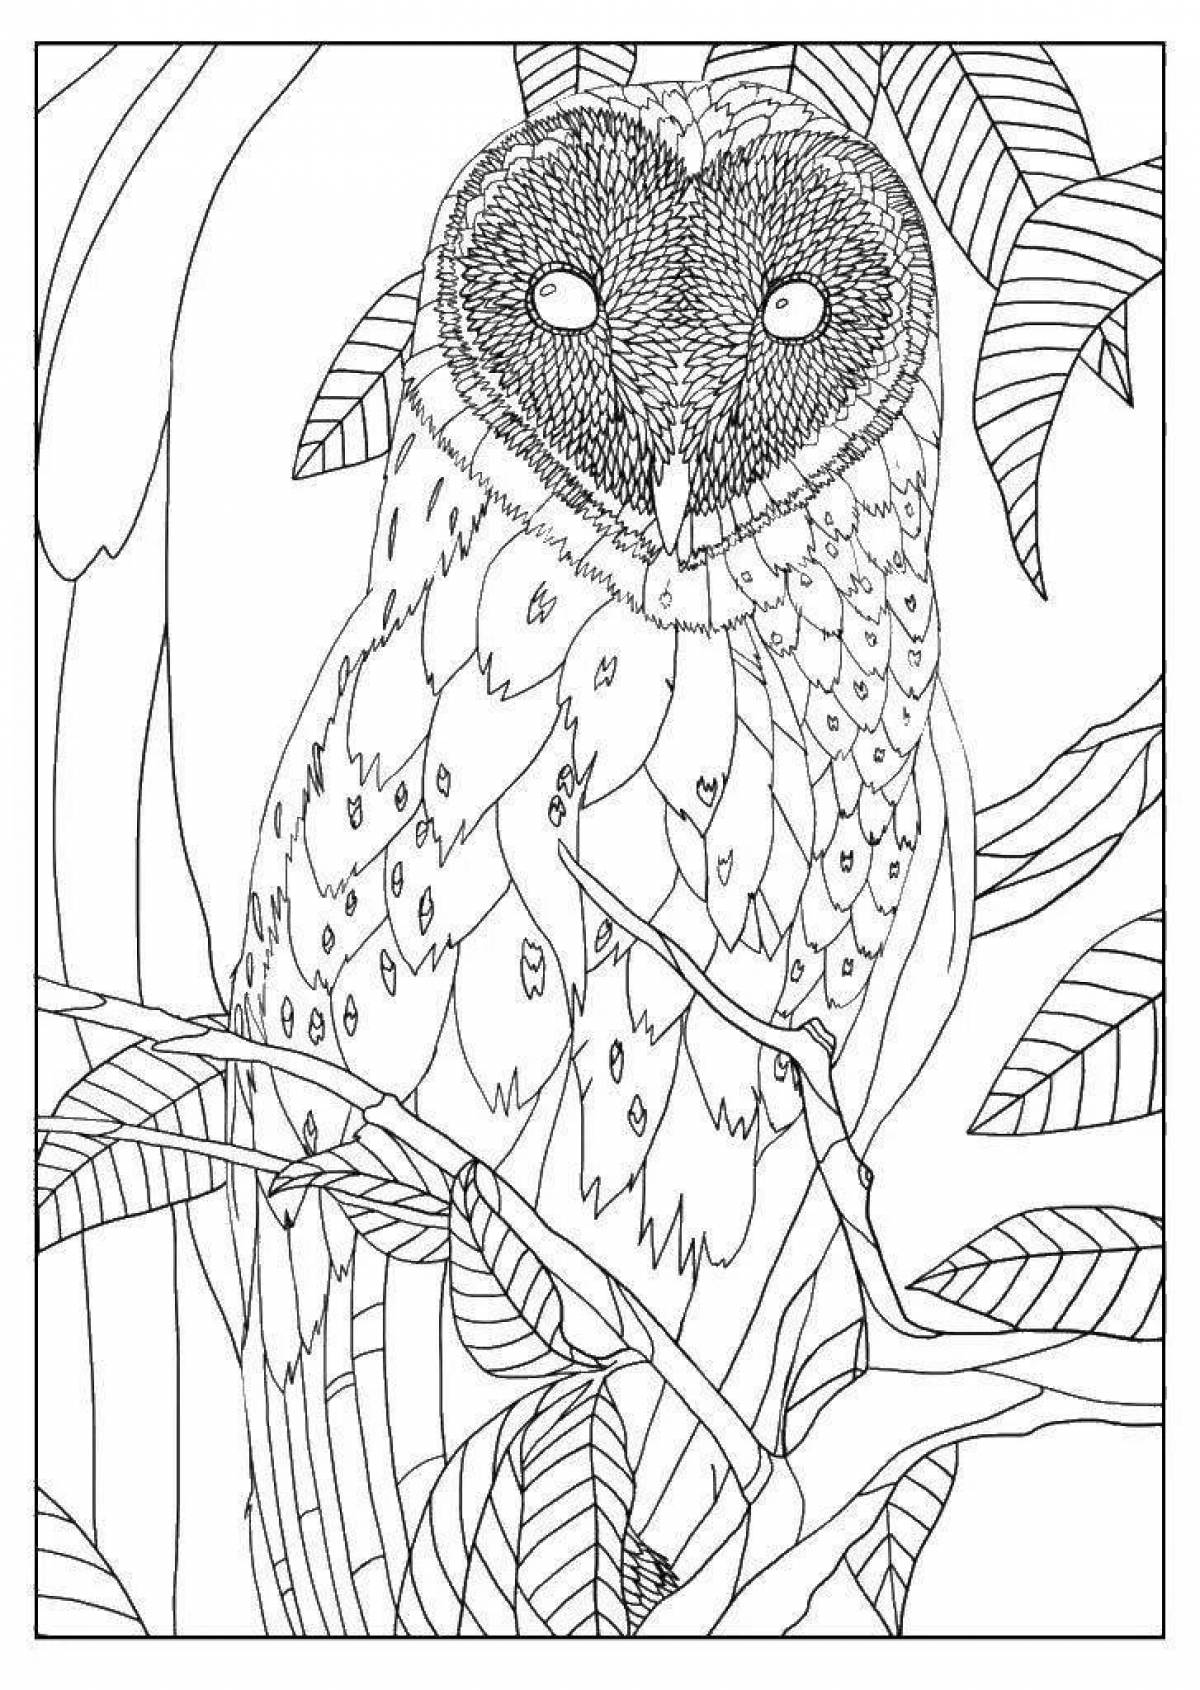 Owl art coloring by numbers